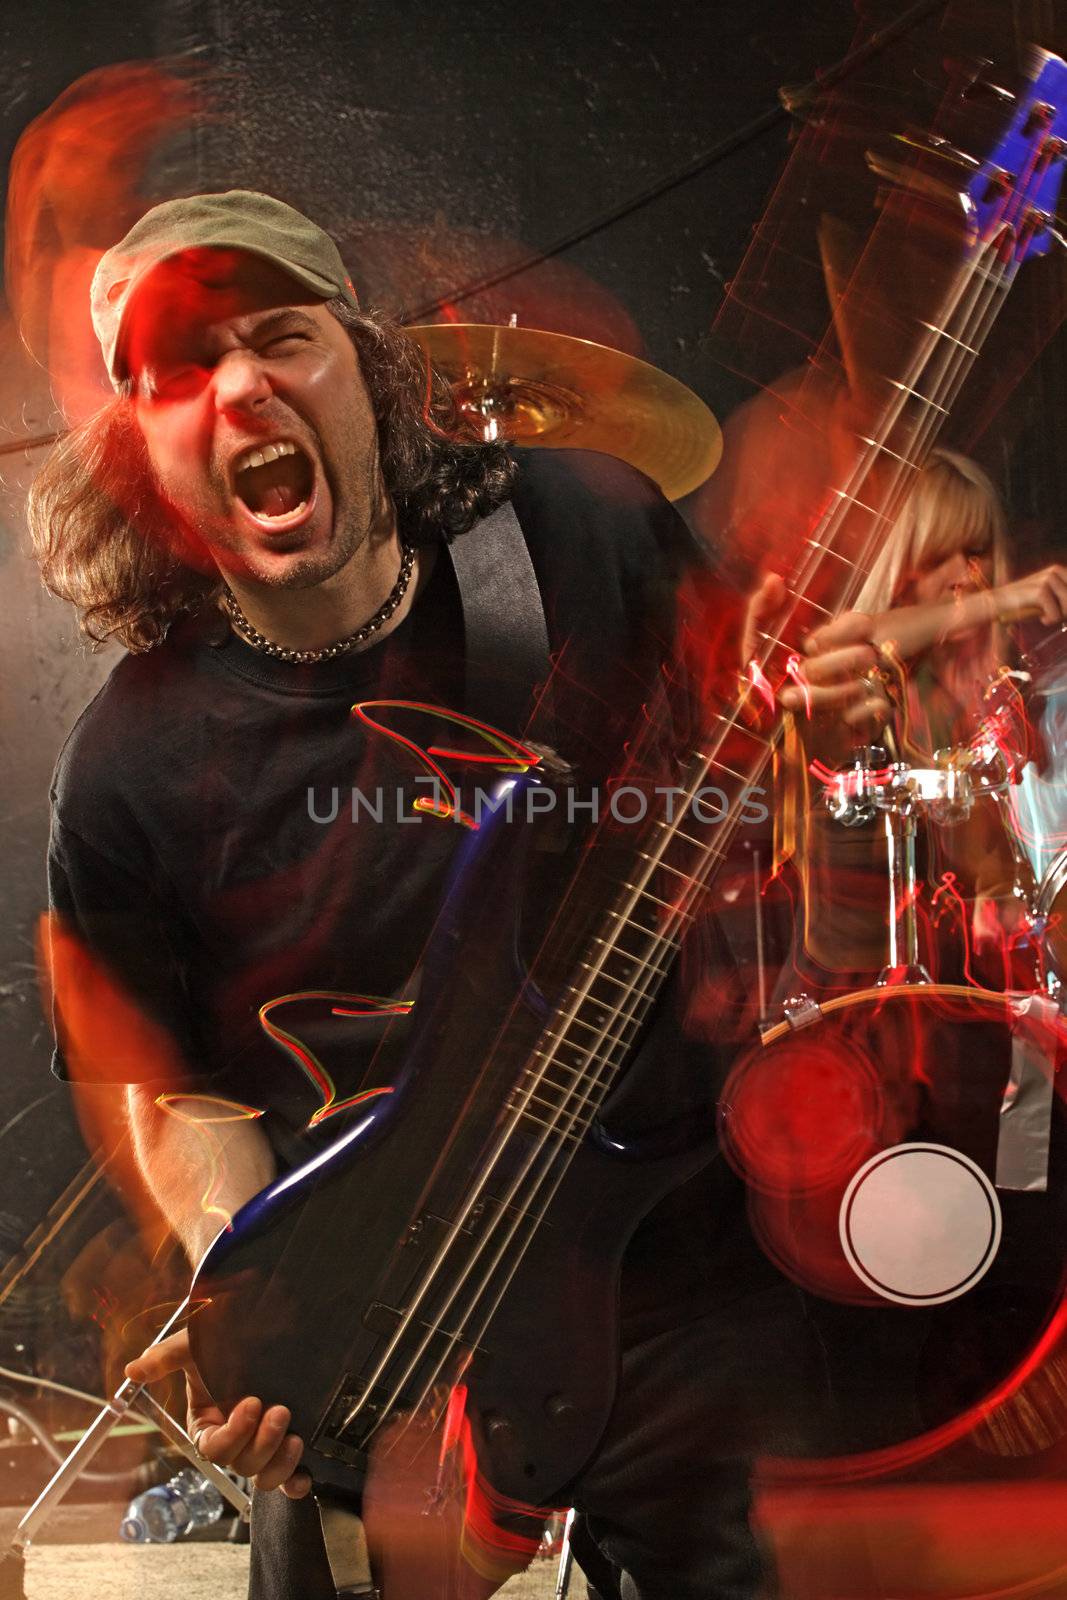 Bass guitarist playing on a stage. Shot with strobes and slow shutter speed to create lighting atmosphere and blur effects. Intense motion blur on performers.